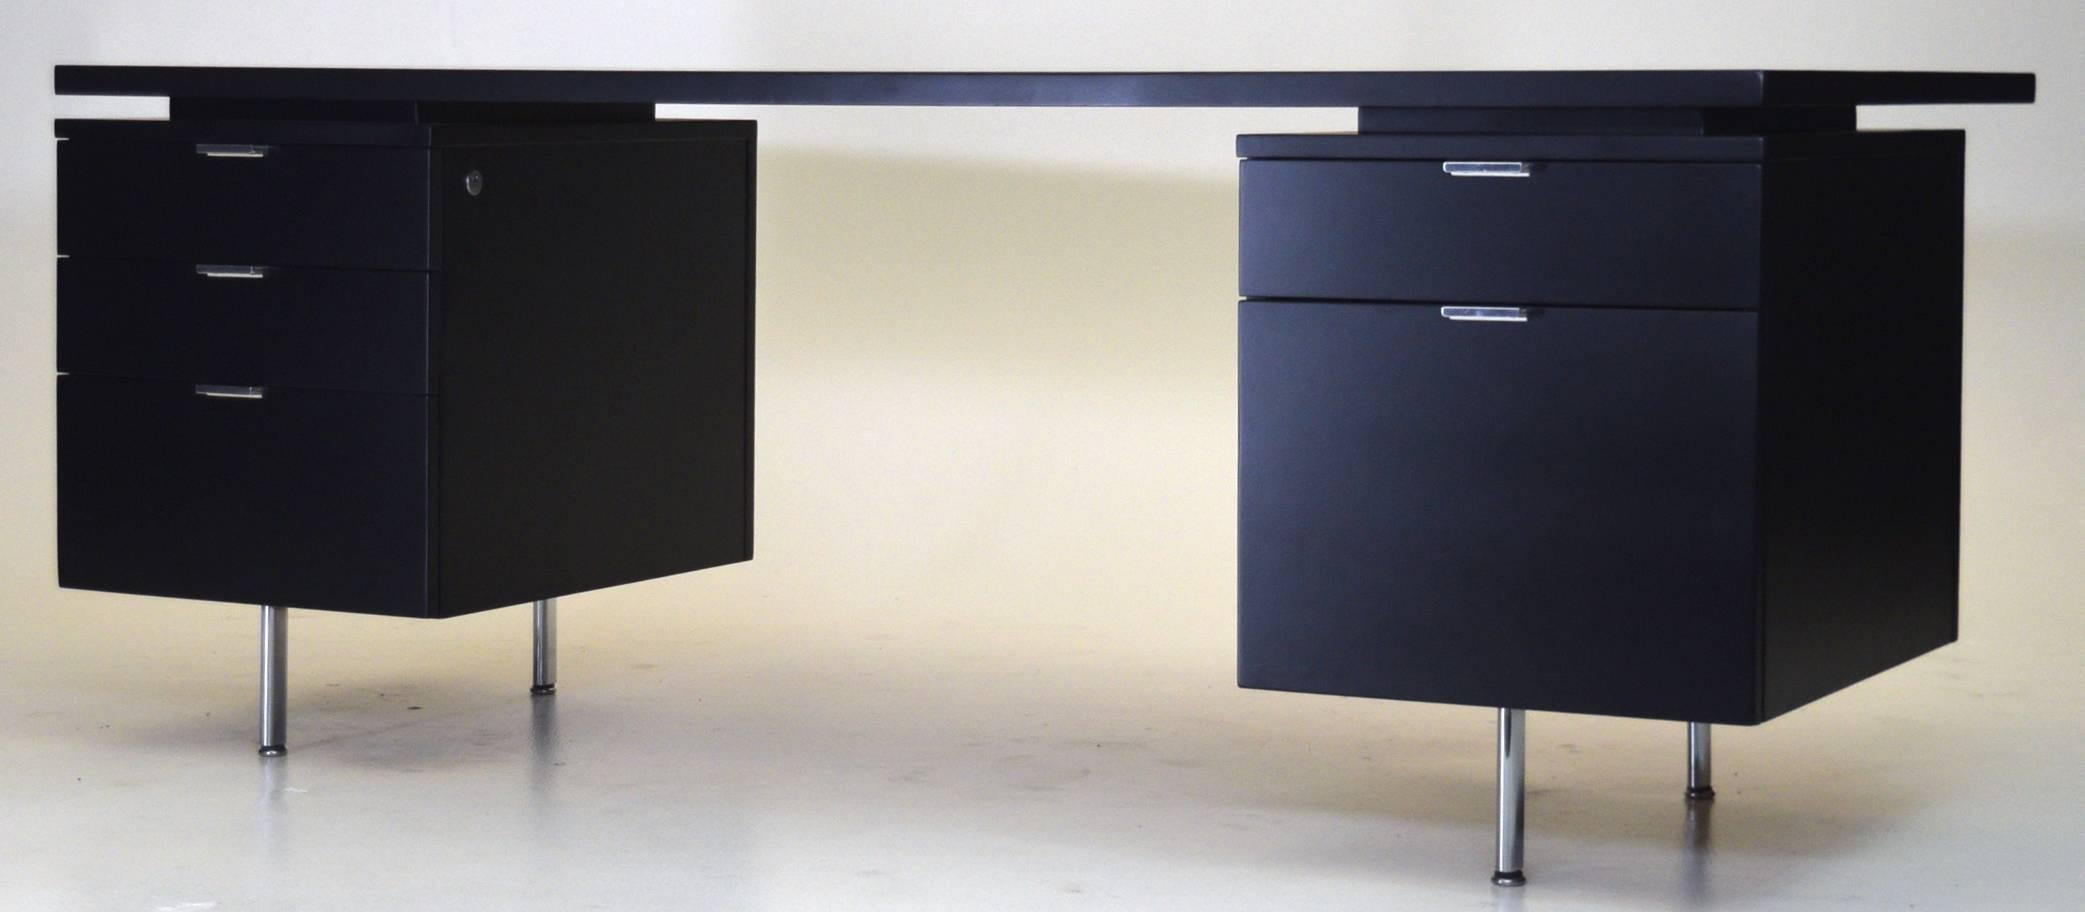 Bold in appearance and newly refinished, this uncommon floating desk was designed by George Nelson for Herman Miller, circa 1950. Chrome legs and pulls, with the desk top floating upon plinths, this vintage desk makes a bold statement measuring